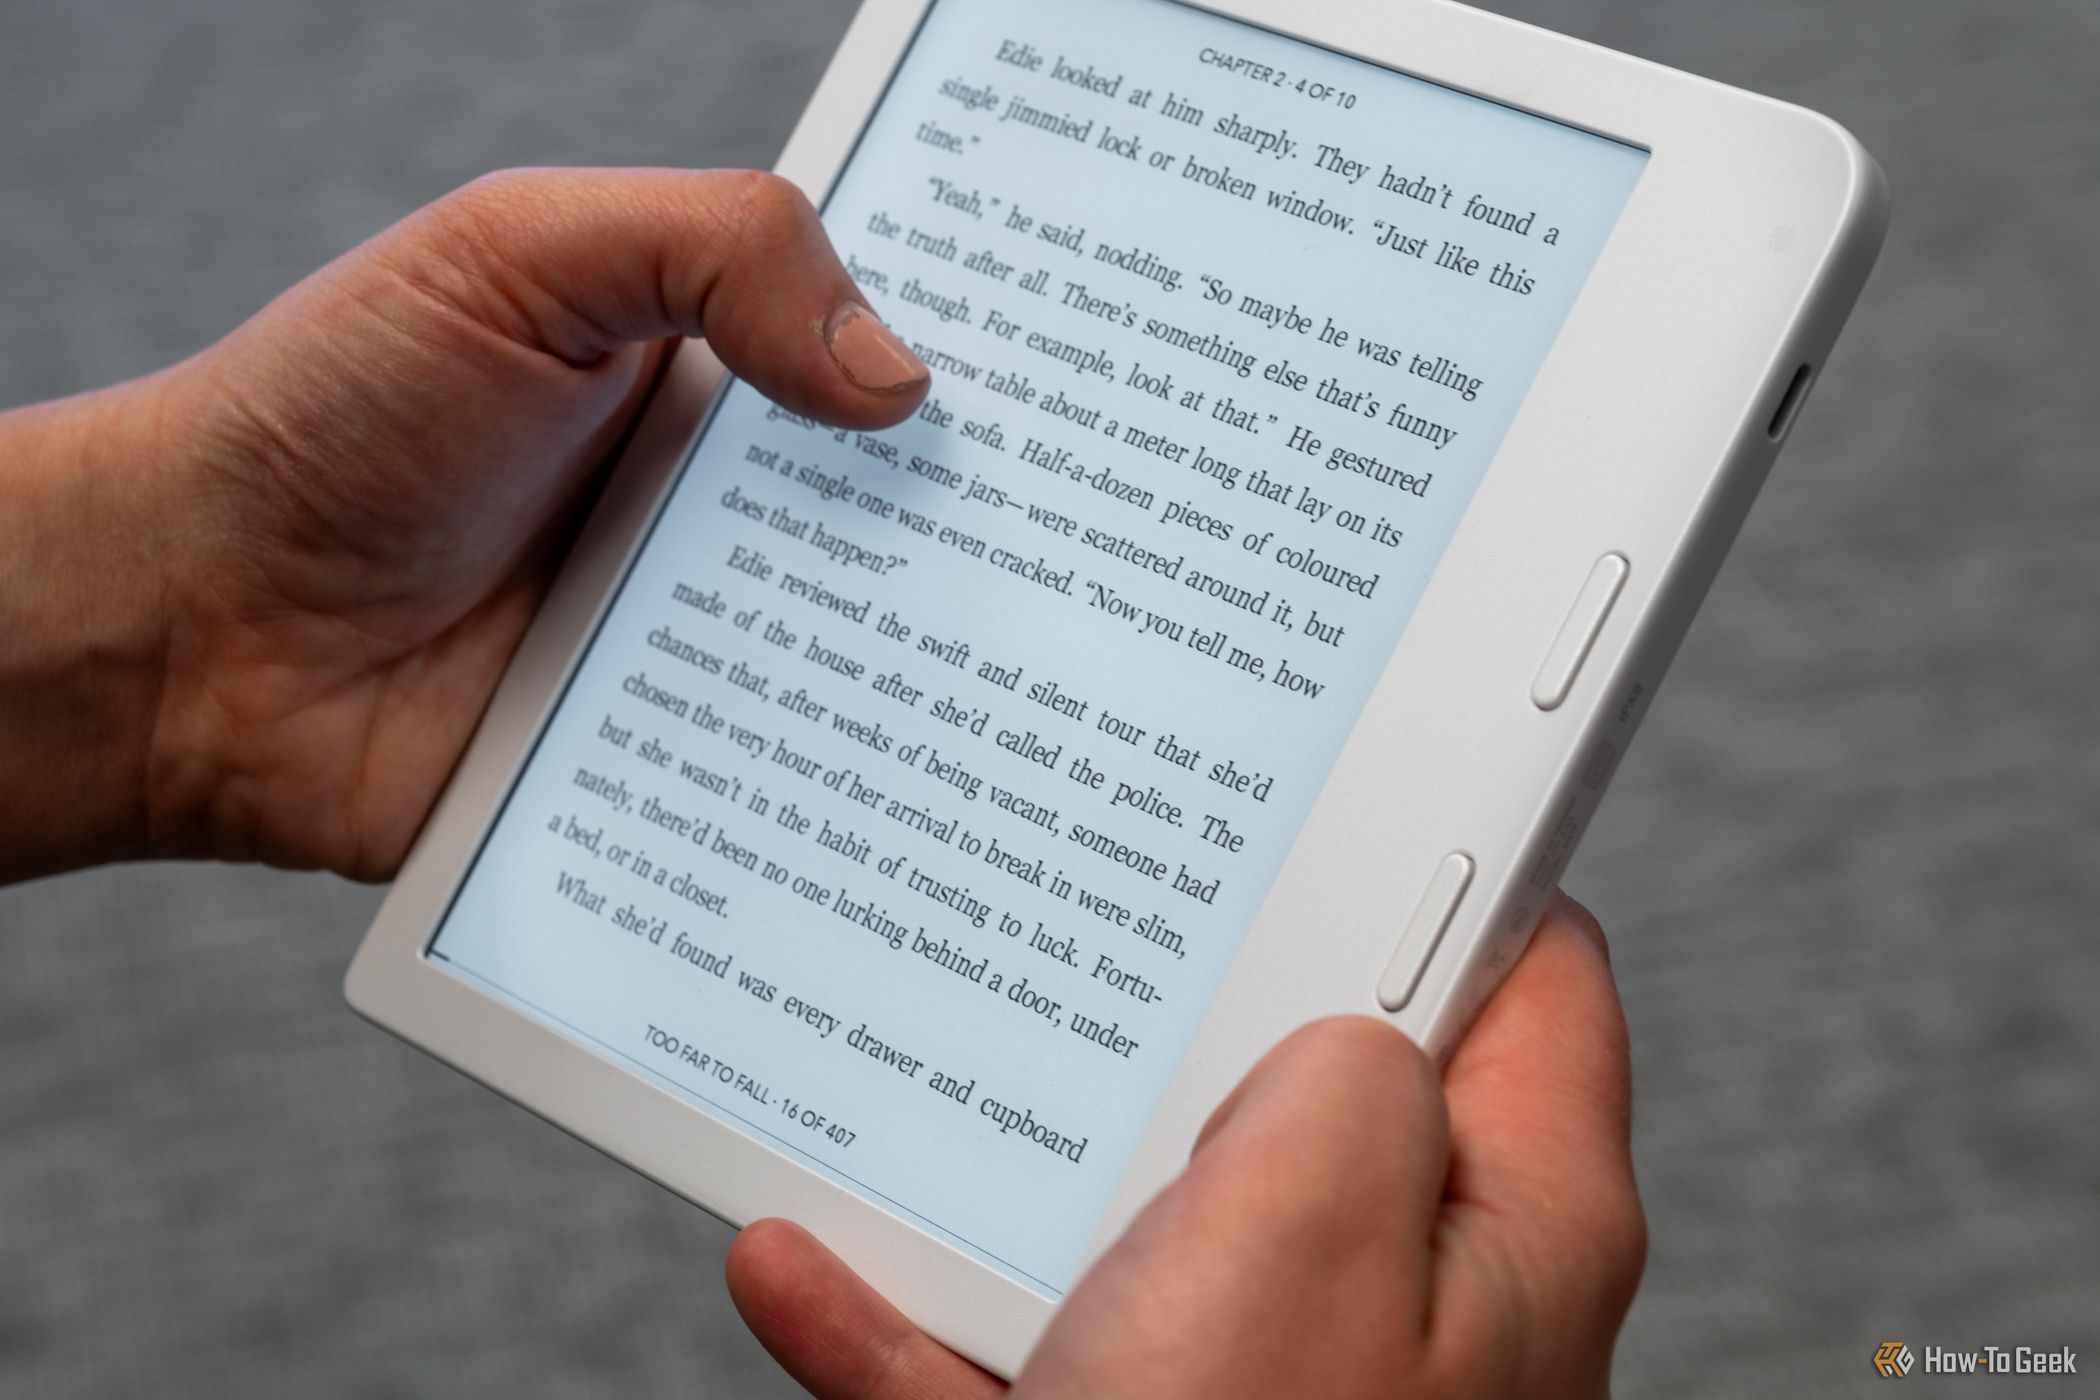 Kobo Libra 2 e-reader review: Freedom with a small price